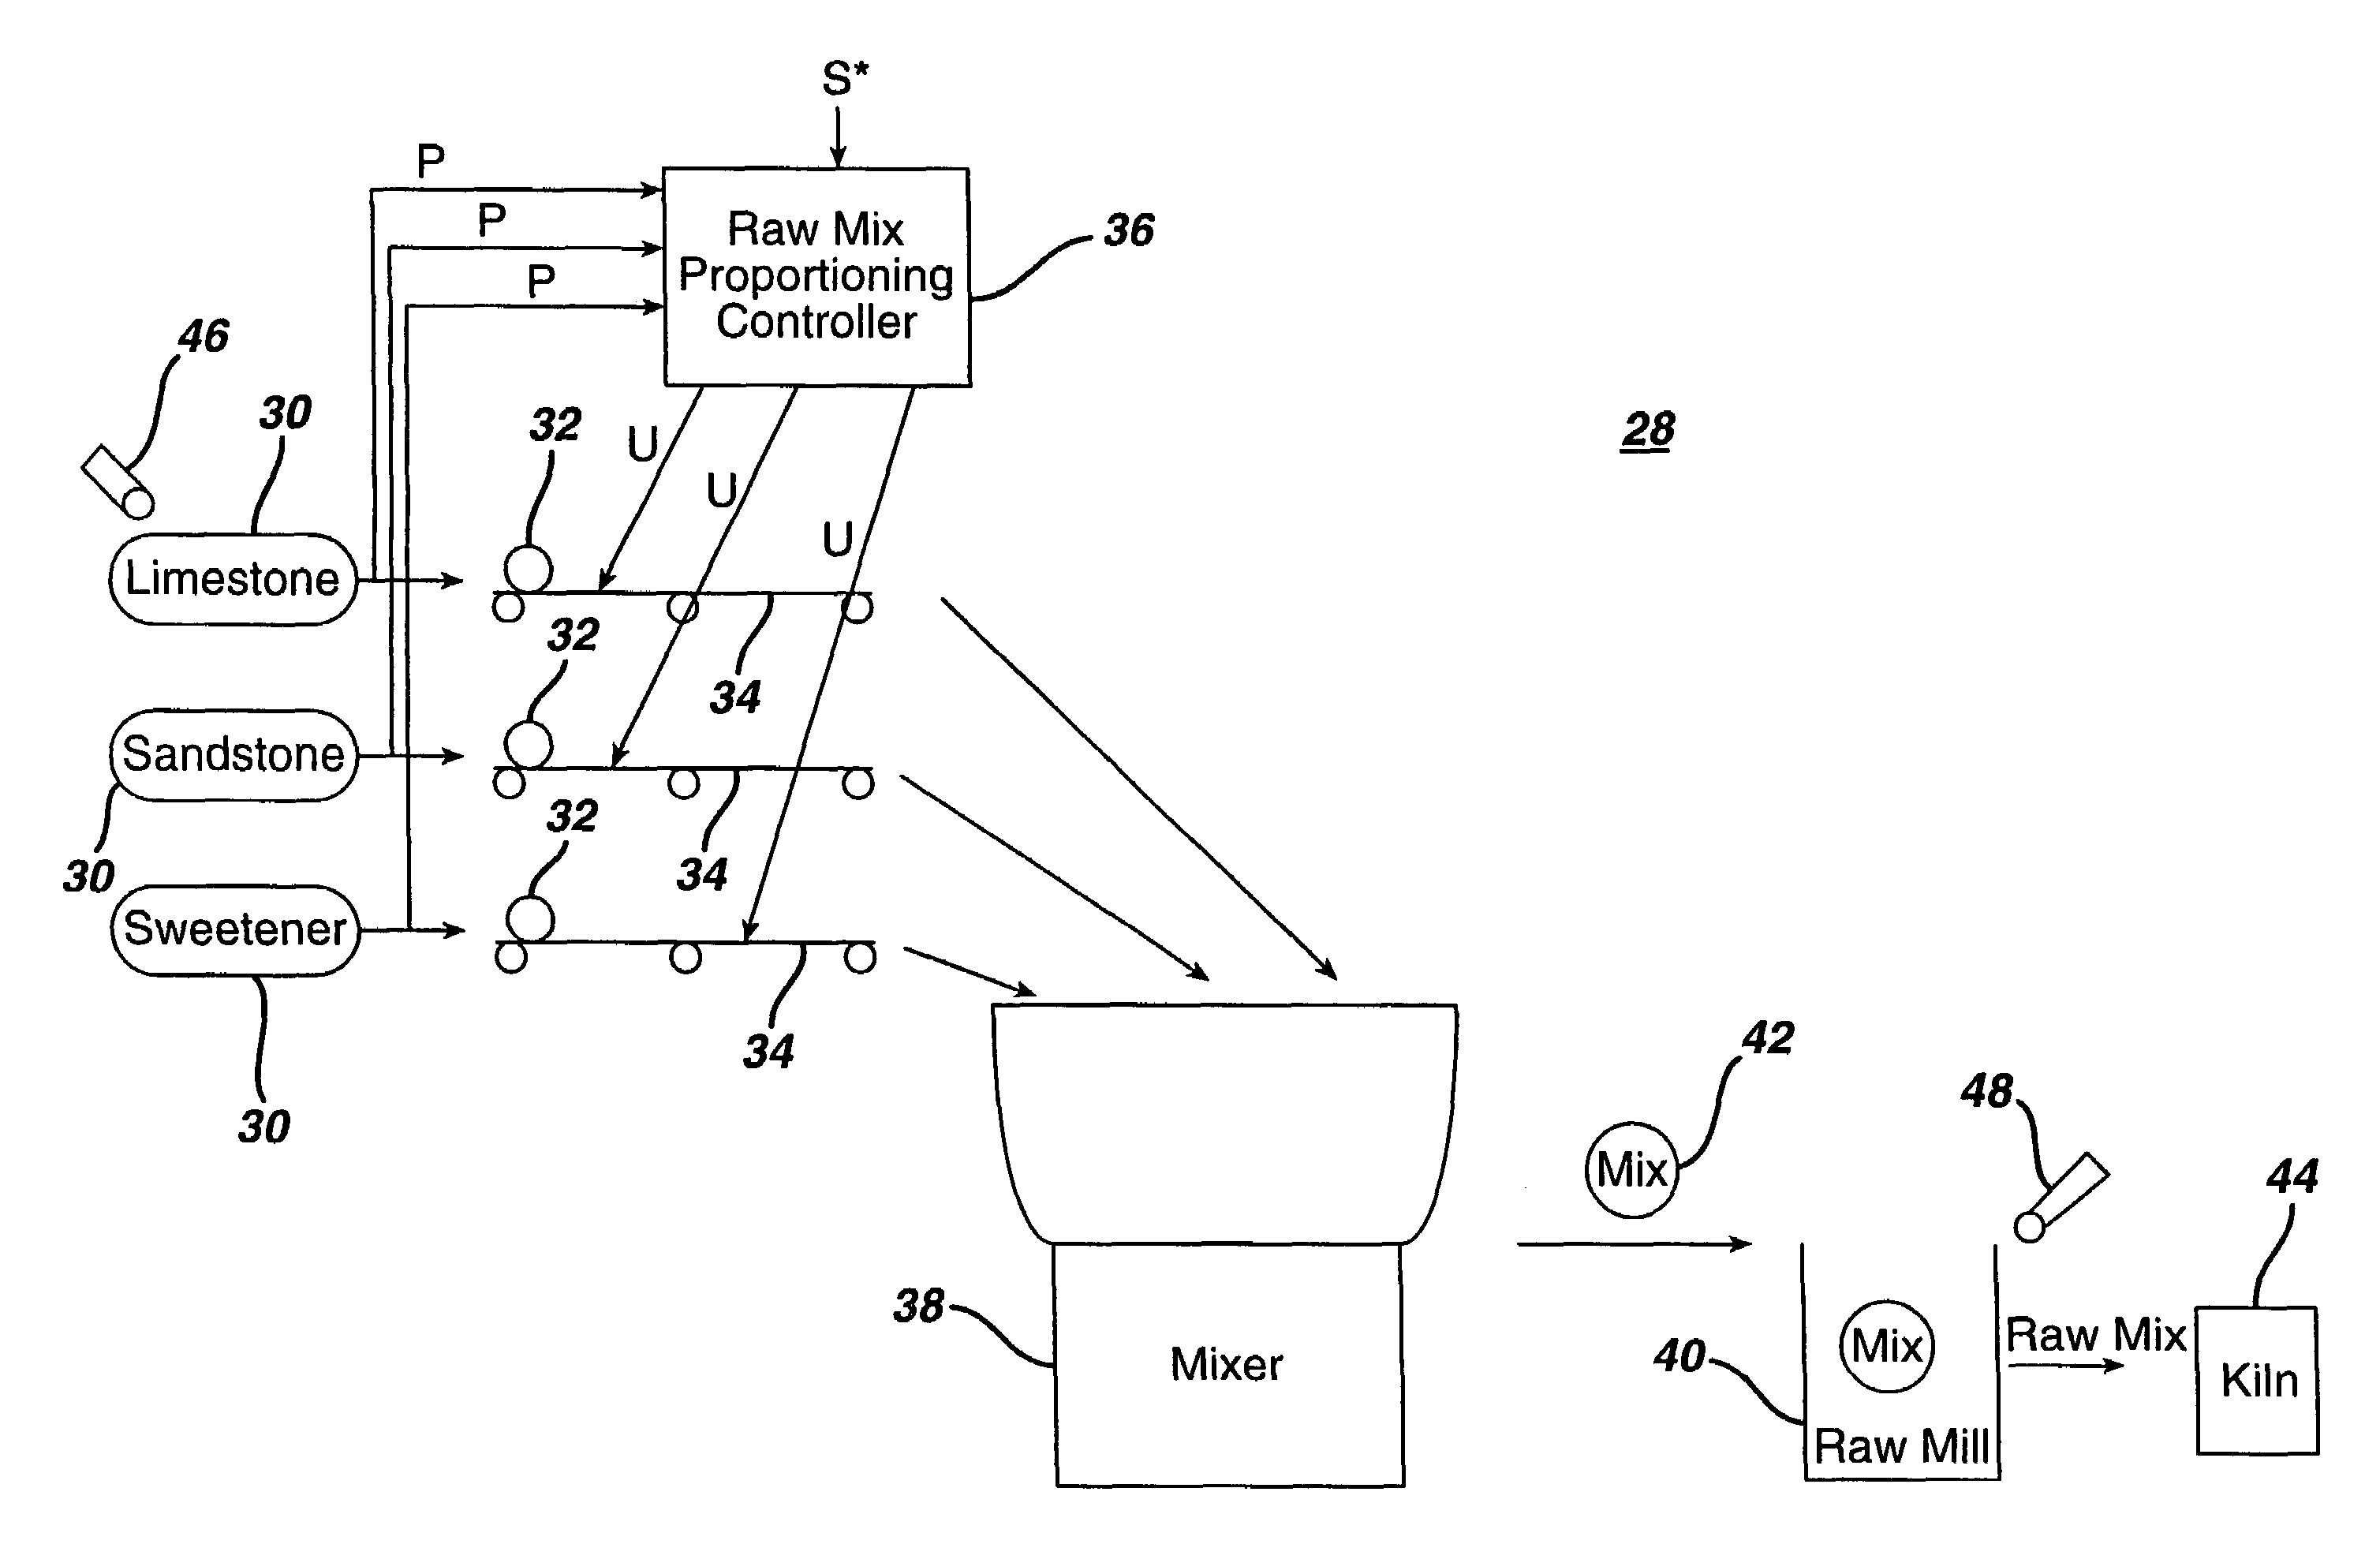 System and method for tuning a raw mix proportioning controller